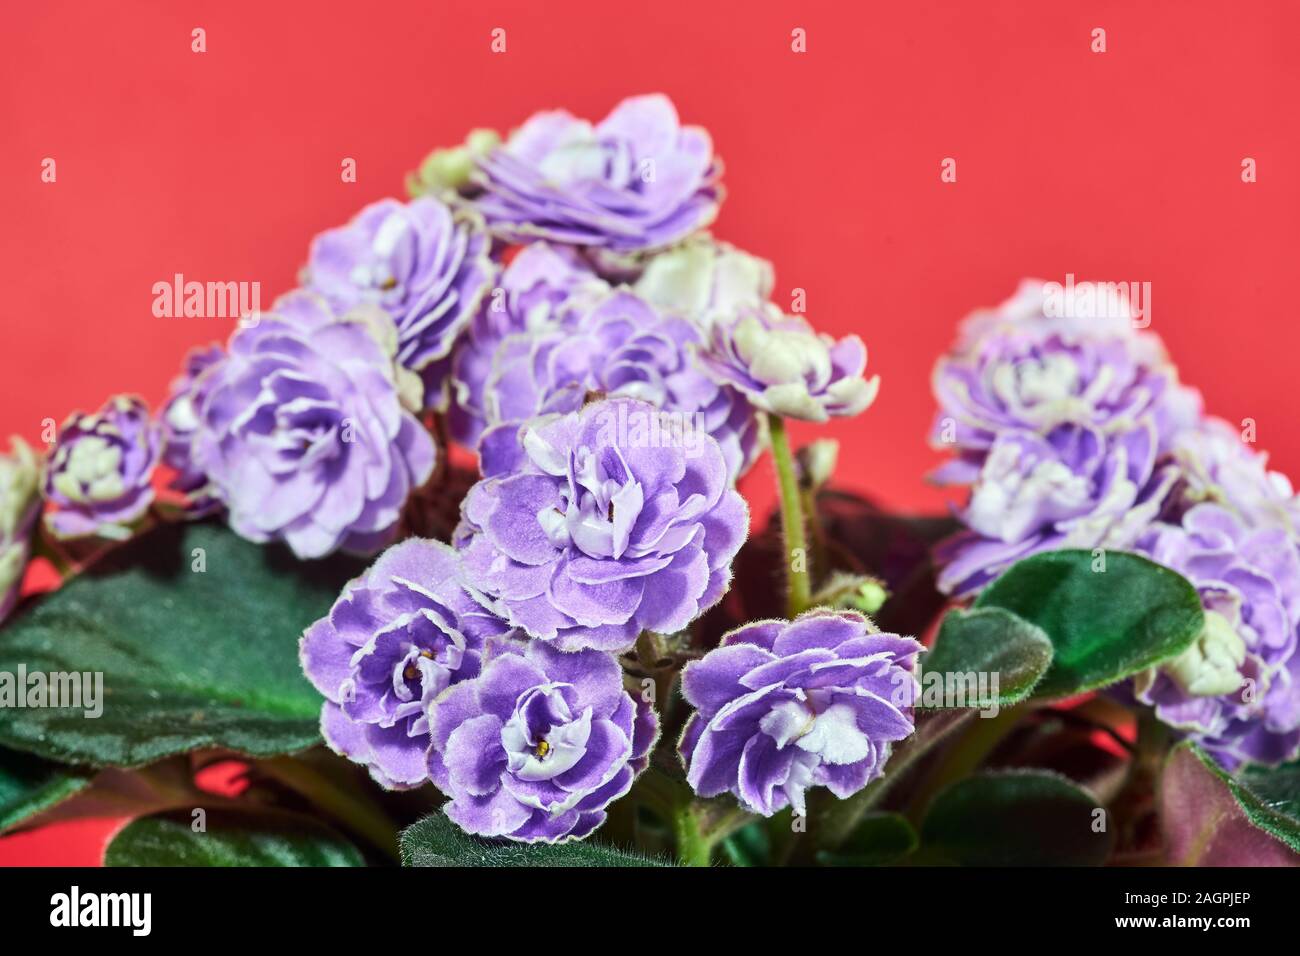 Details of a blooming African violet potted flower Stock Photo